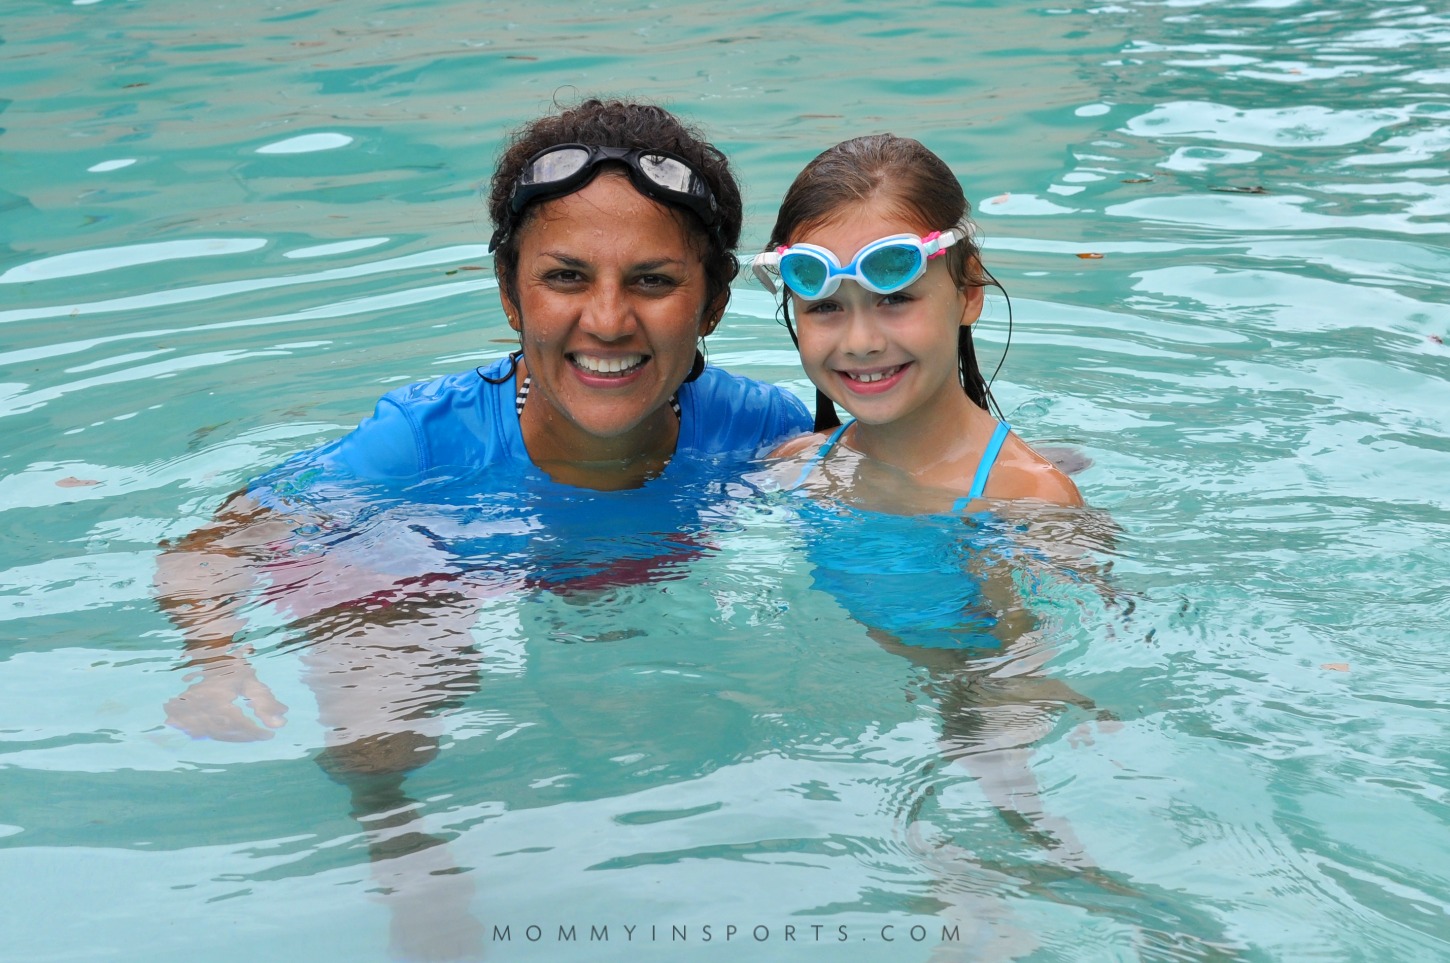 Not sure if your little one needs swim lessons? Drowning is the #1 cause of death of children under the age of 5. And they can learn quickly, don't hesitate, learn to swim easily!